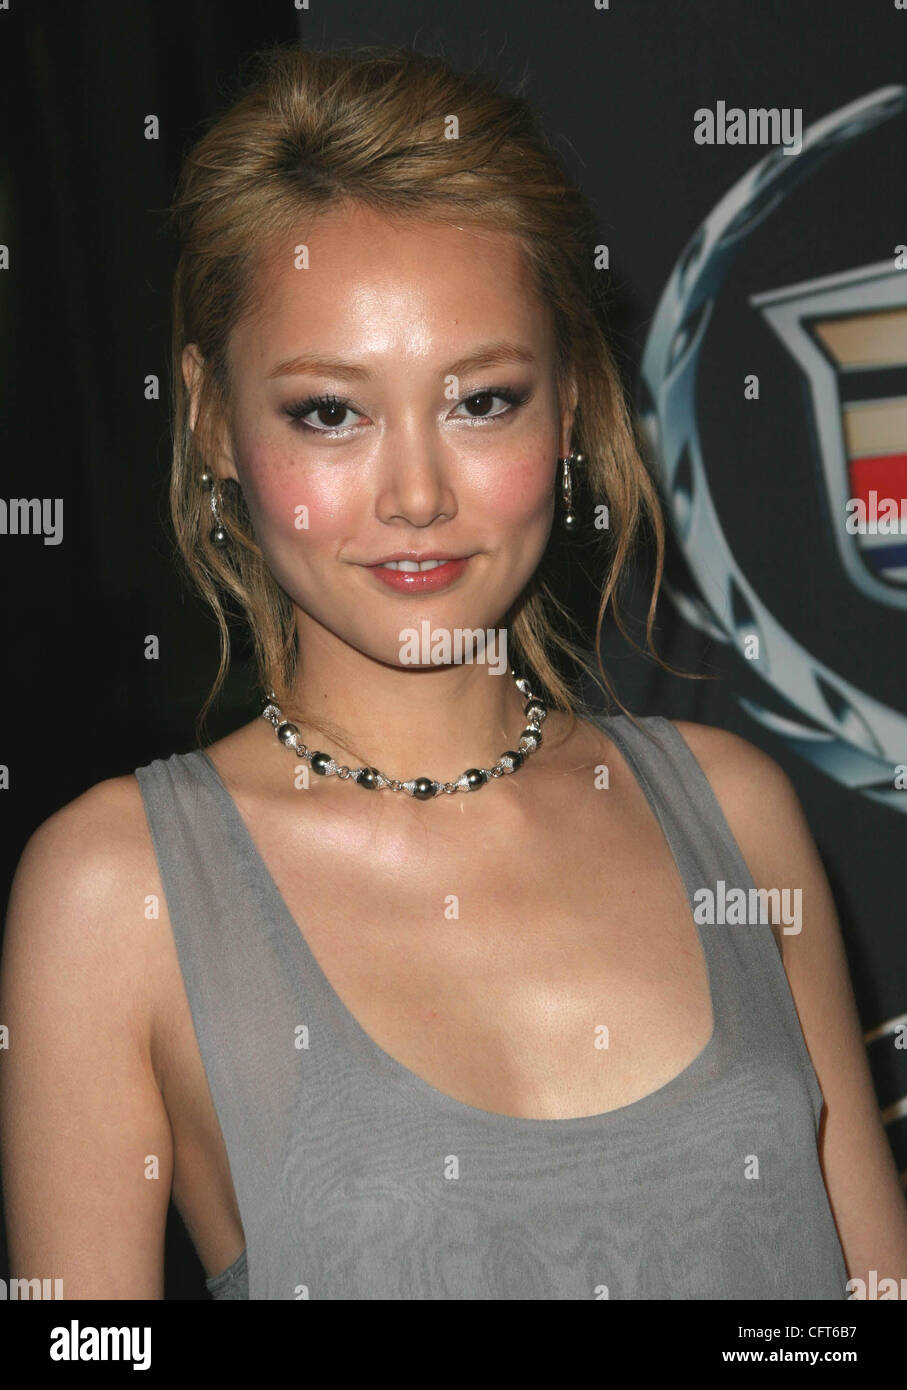 (C)Stargaze Media Photos Photo By Scott Weiner Rinko Kikuchi attends the premiere for Dreamgirls held at the Wilshire Theatre in Beverly Hills,California 12/11/06. Stock Photo